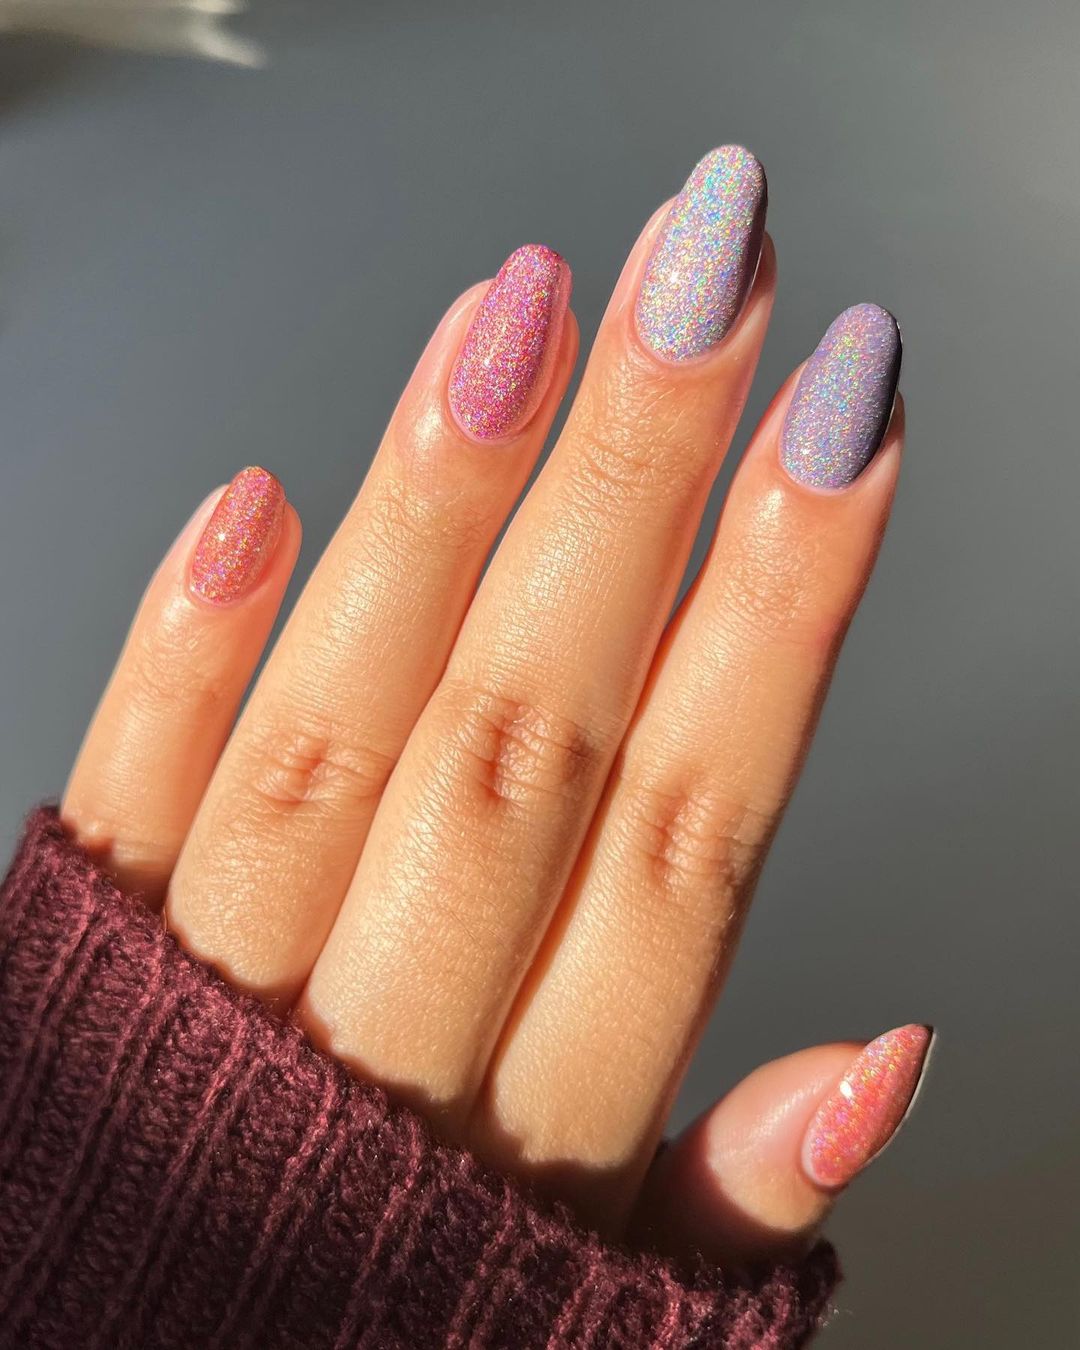 holographic nails by @aanchysnails featuring ella+mila cruelty free nail polish